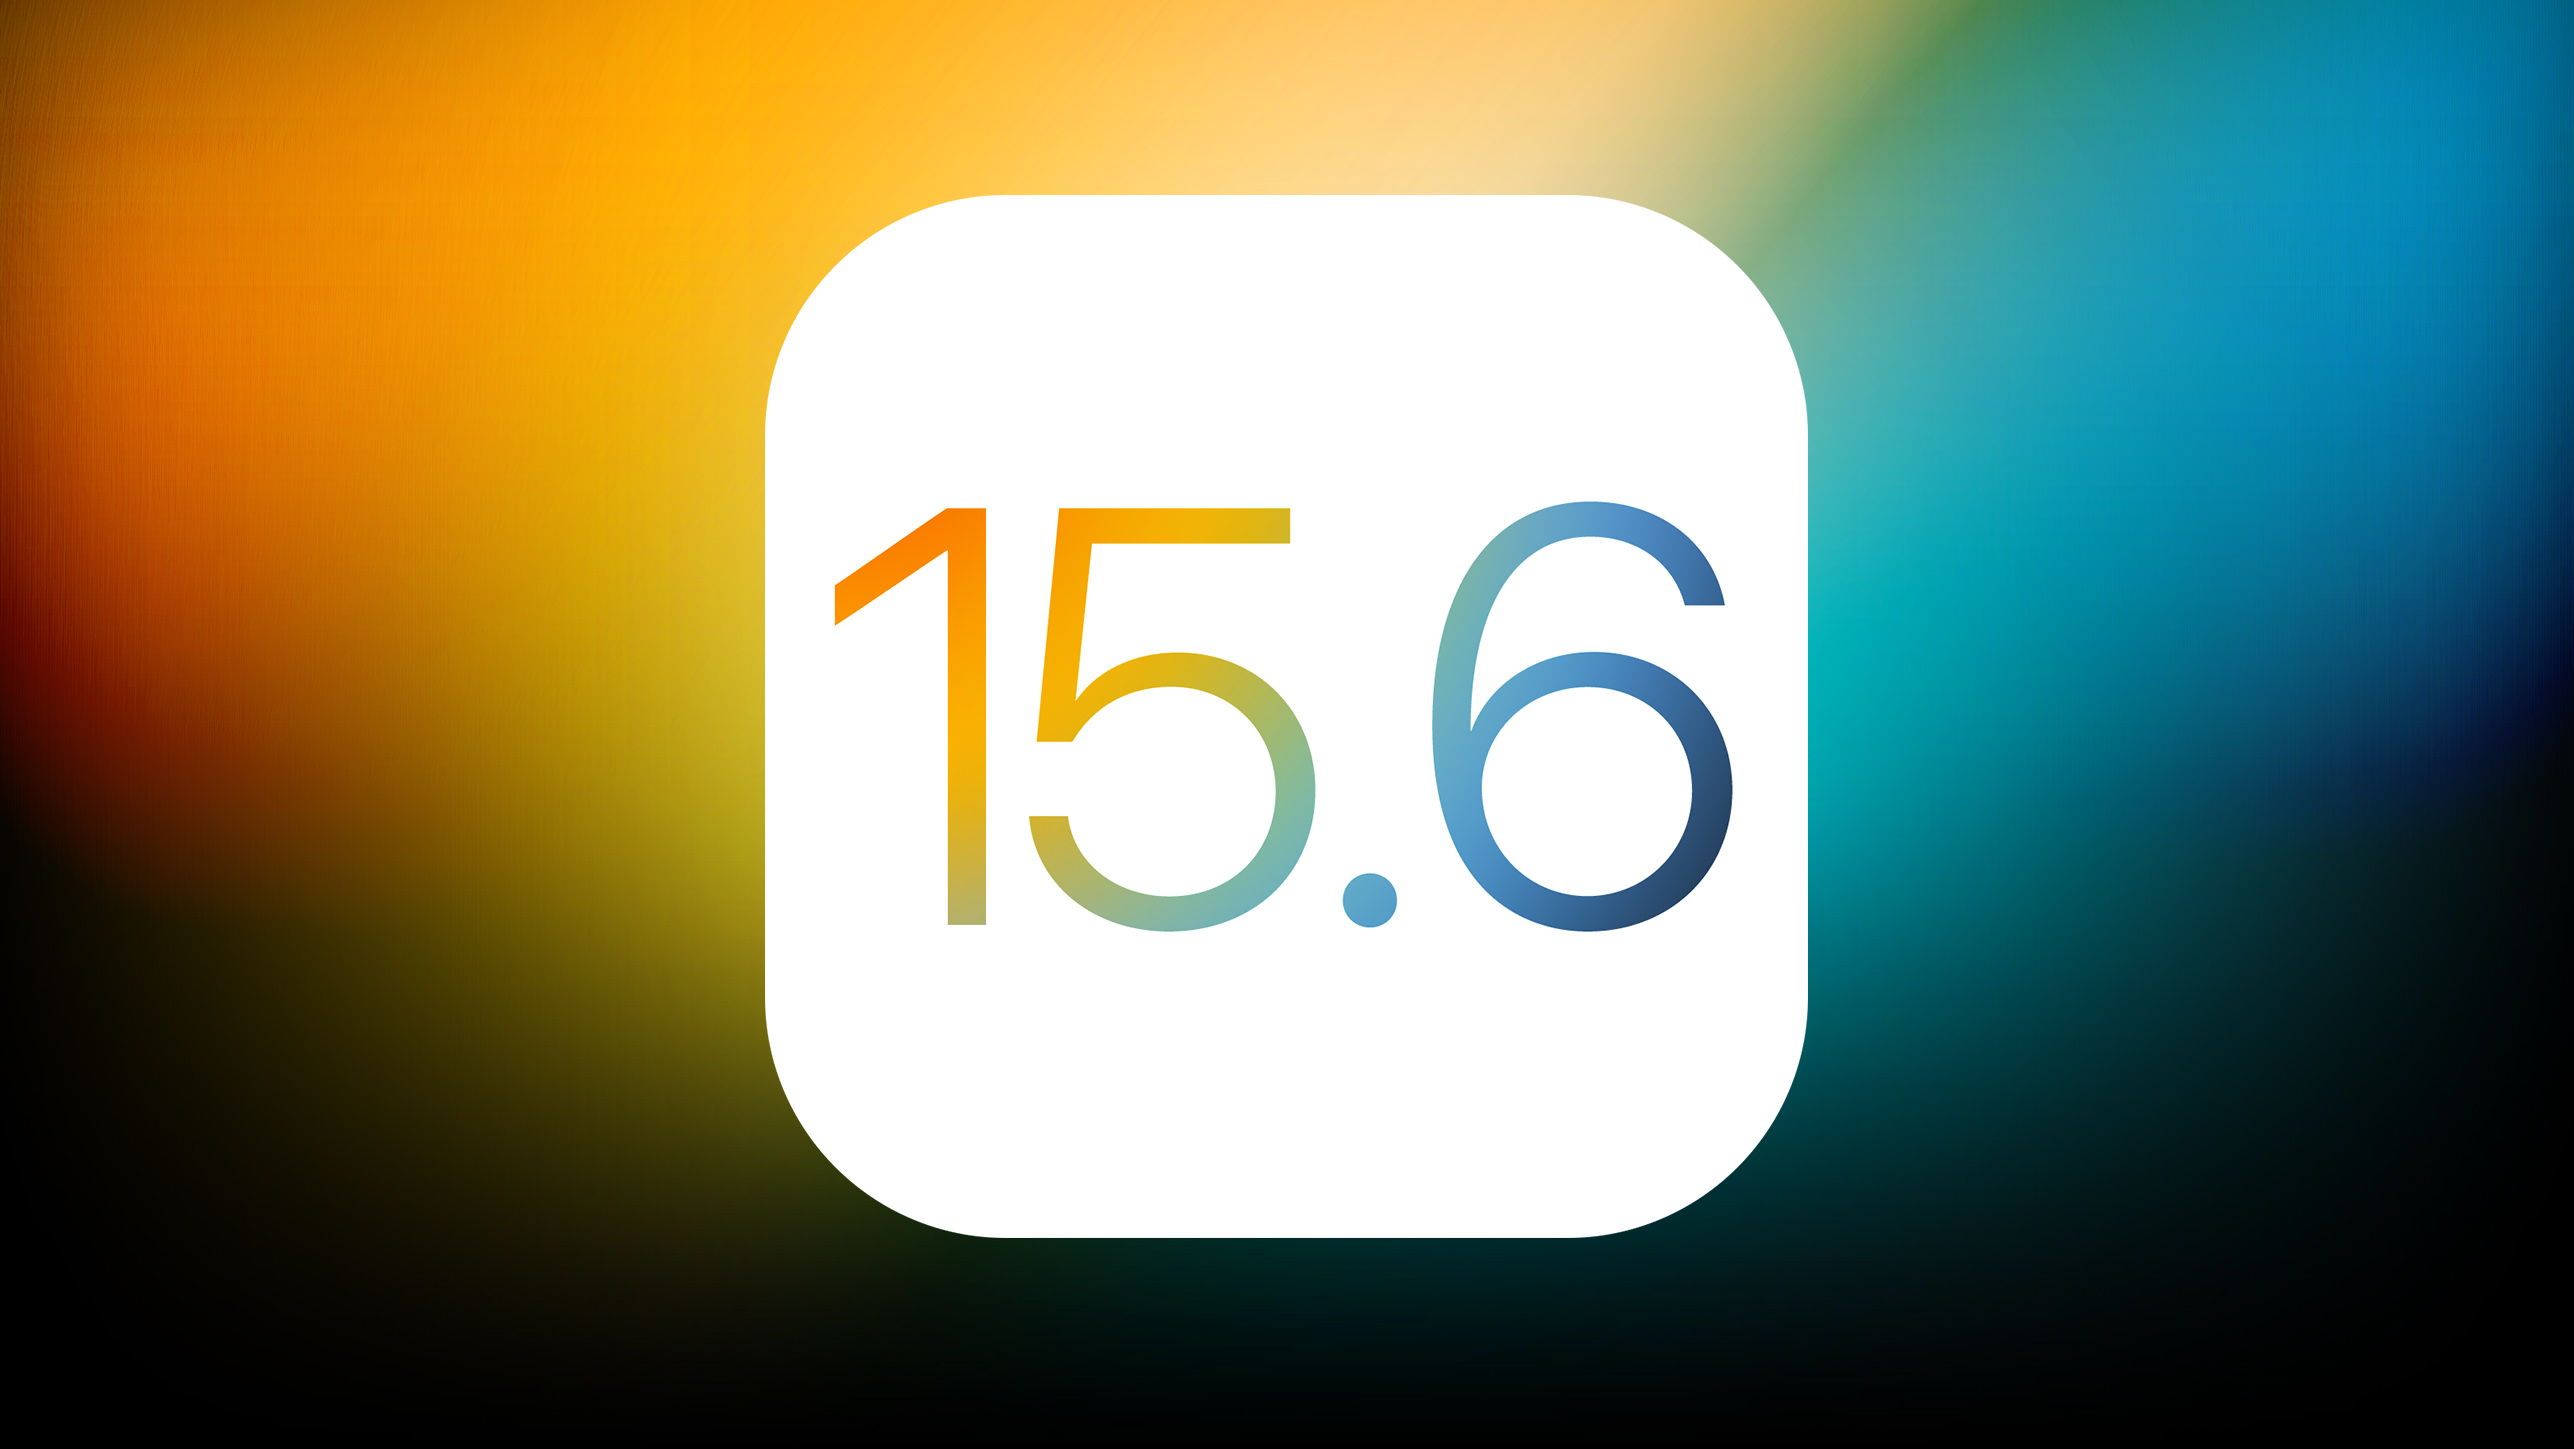 Apple Seeds Fifth Betas of iOS 15.6 and iPadOS 15.6 to Developers